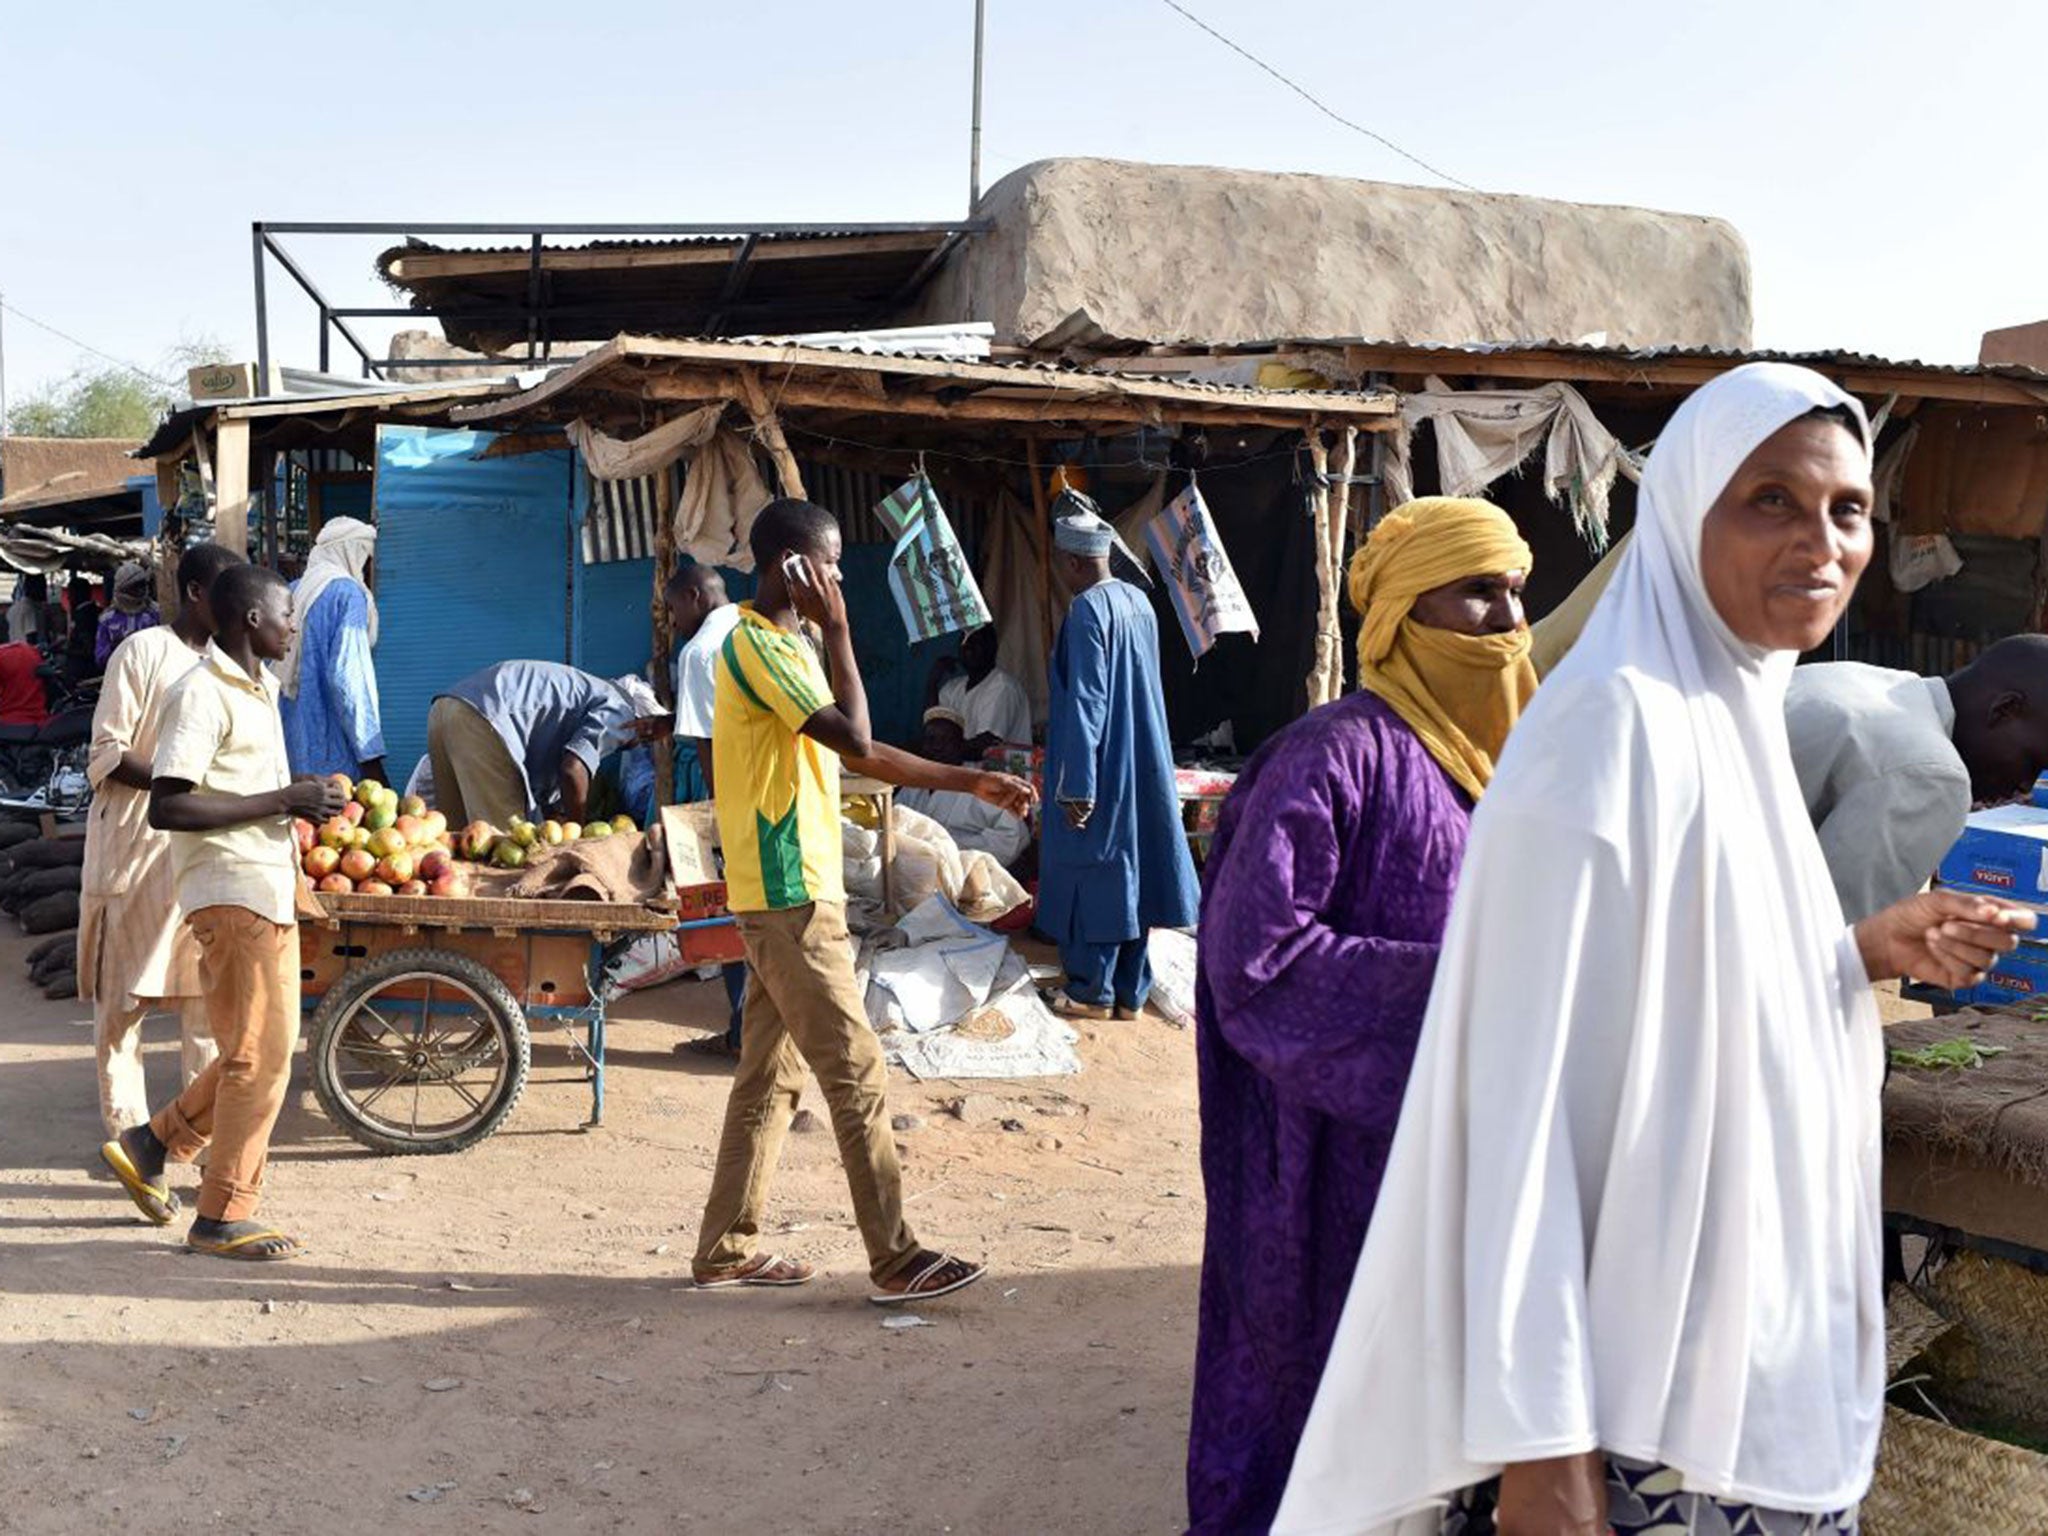 People shop at a market of the central Niger city of Agadez on May 29, 2015.